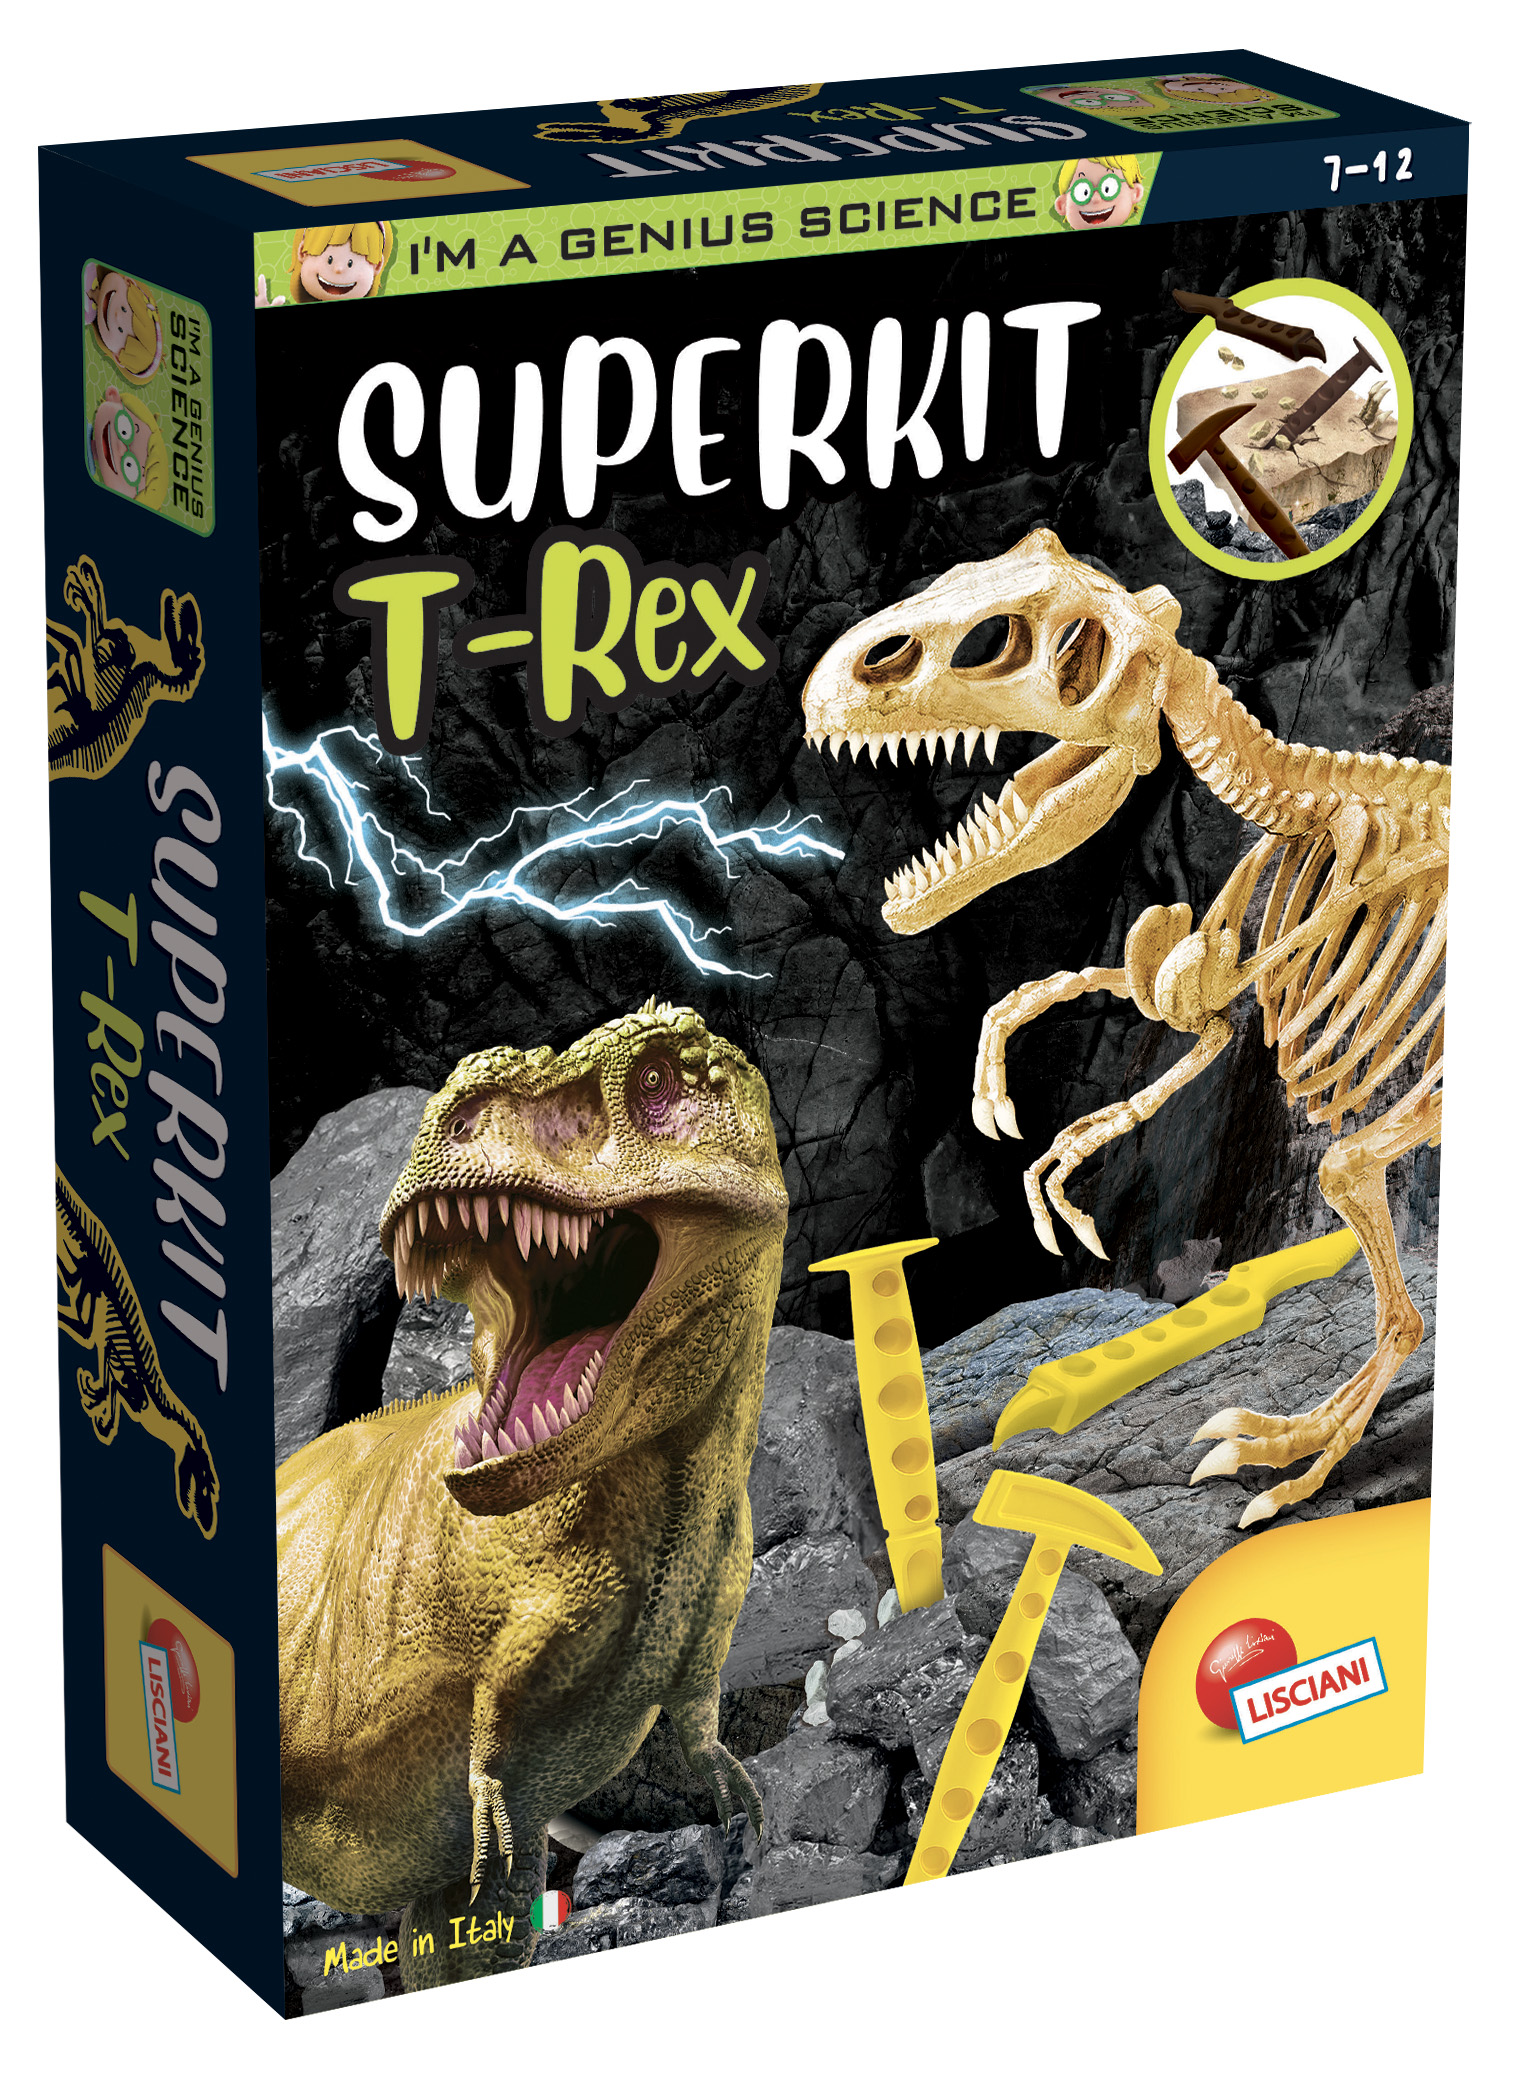 Photo 1 of the game I'M A GENIUS T-REX SUPERKIT